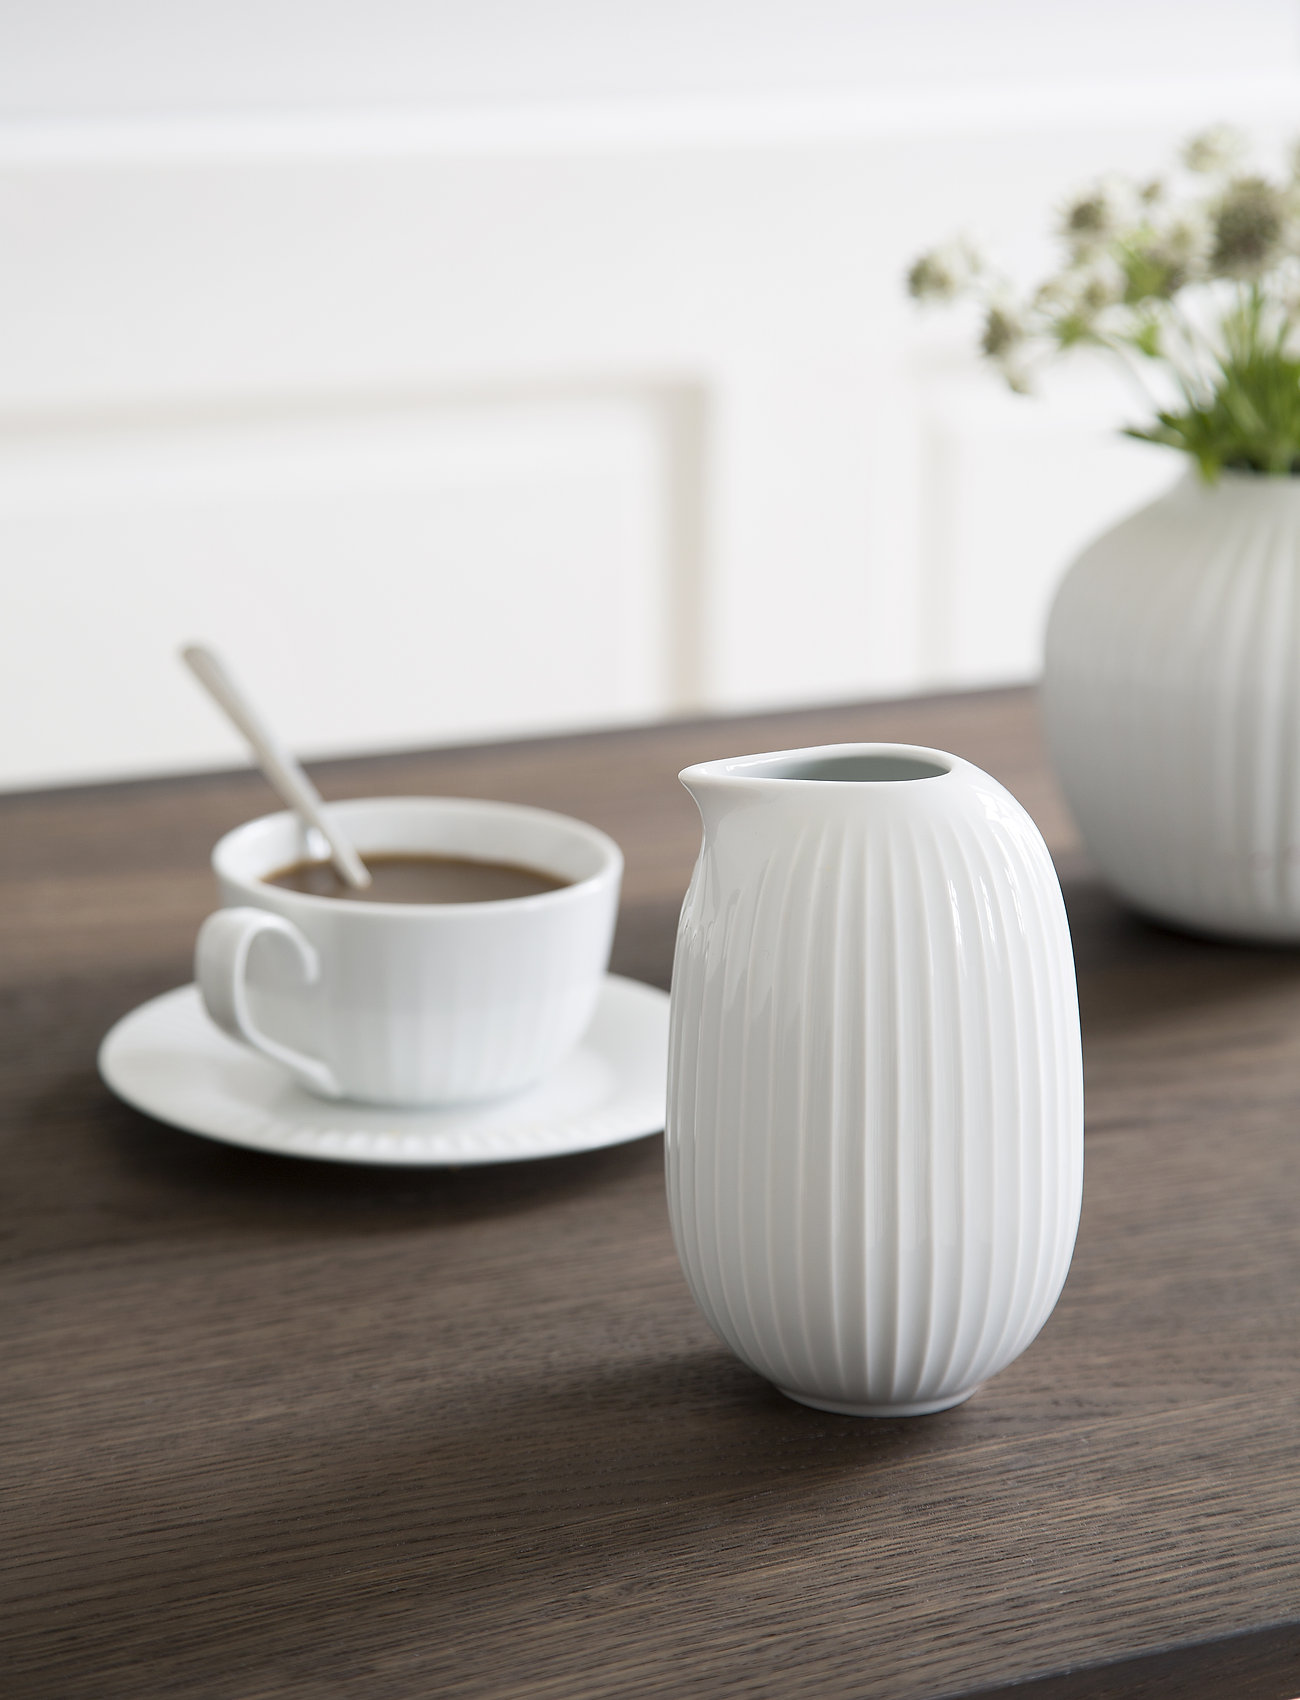 Kähler - Hammershøi Coffee cup with matching saucer 25 cl - madalaimad hinnad - white - 1